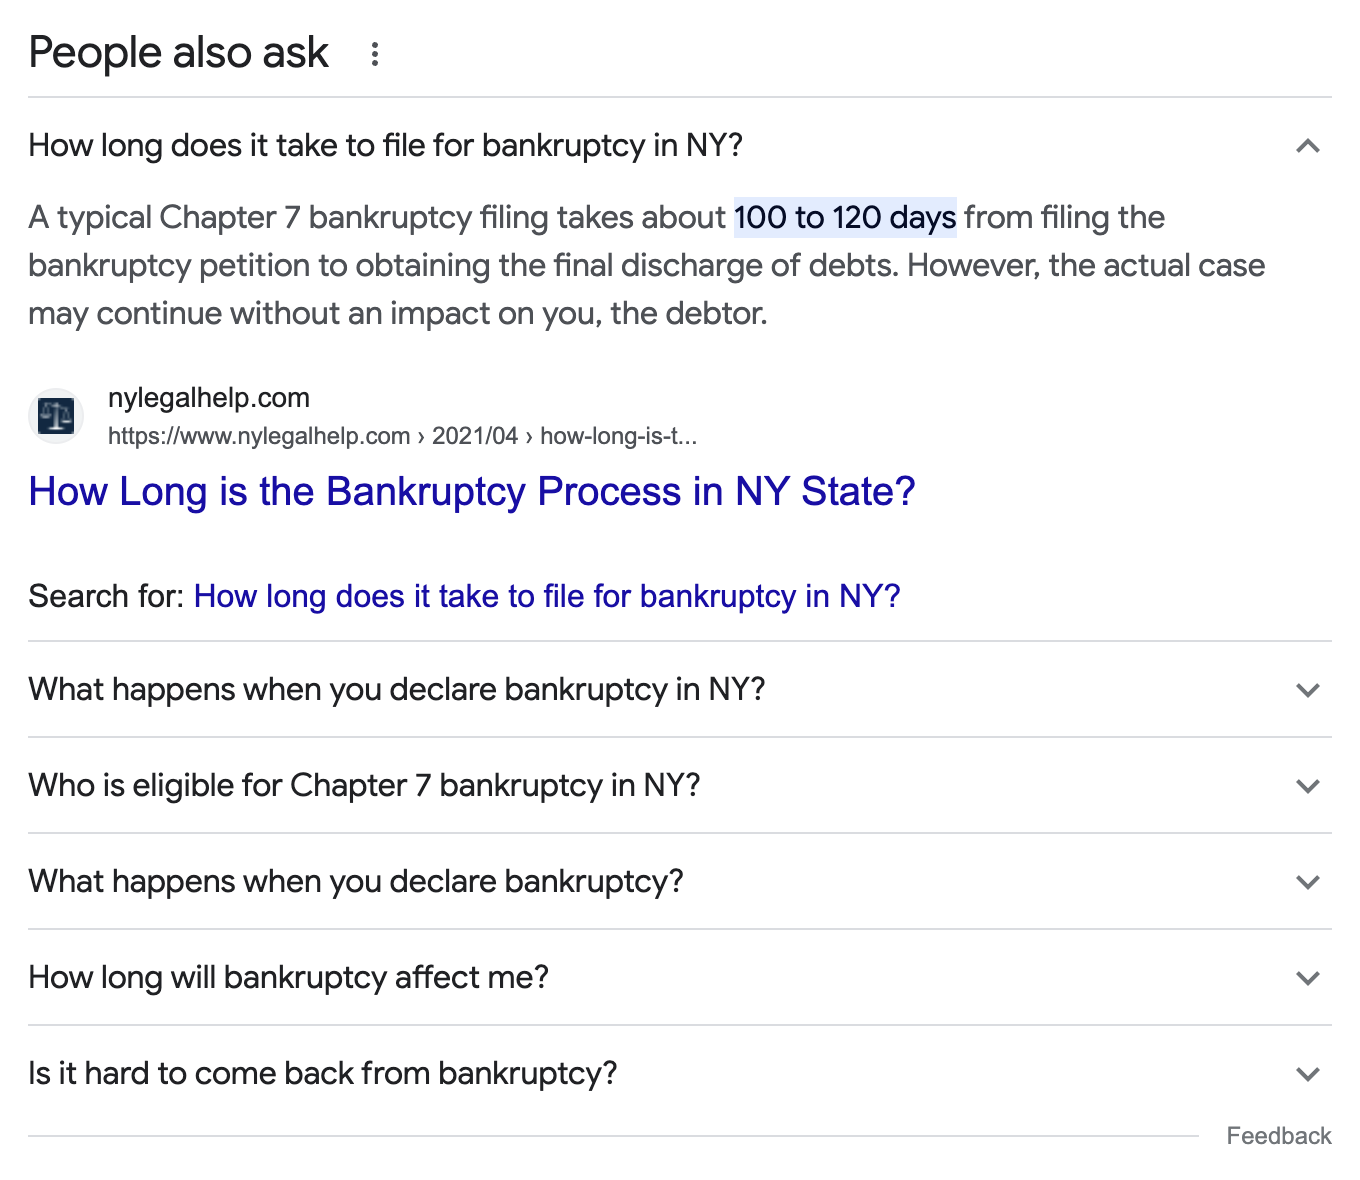 People Also Ask box for how to file for bankruptcy in New York